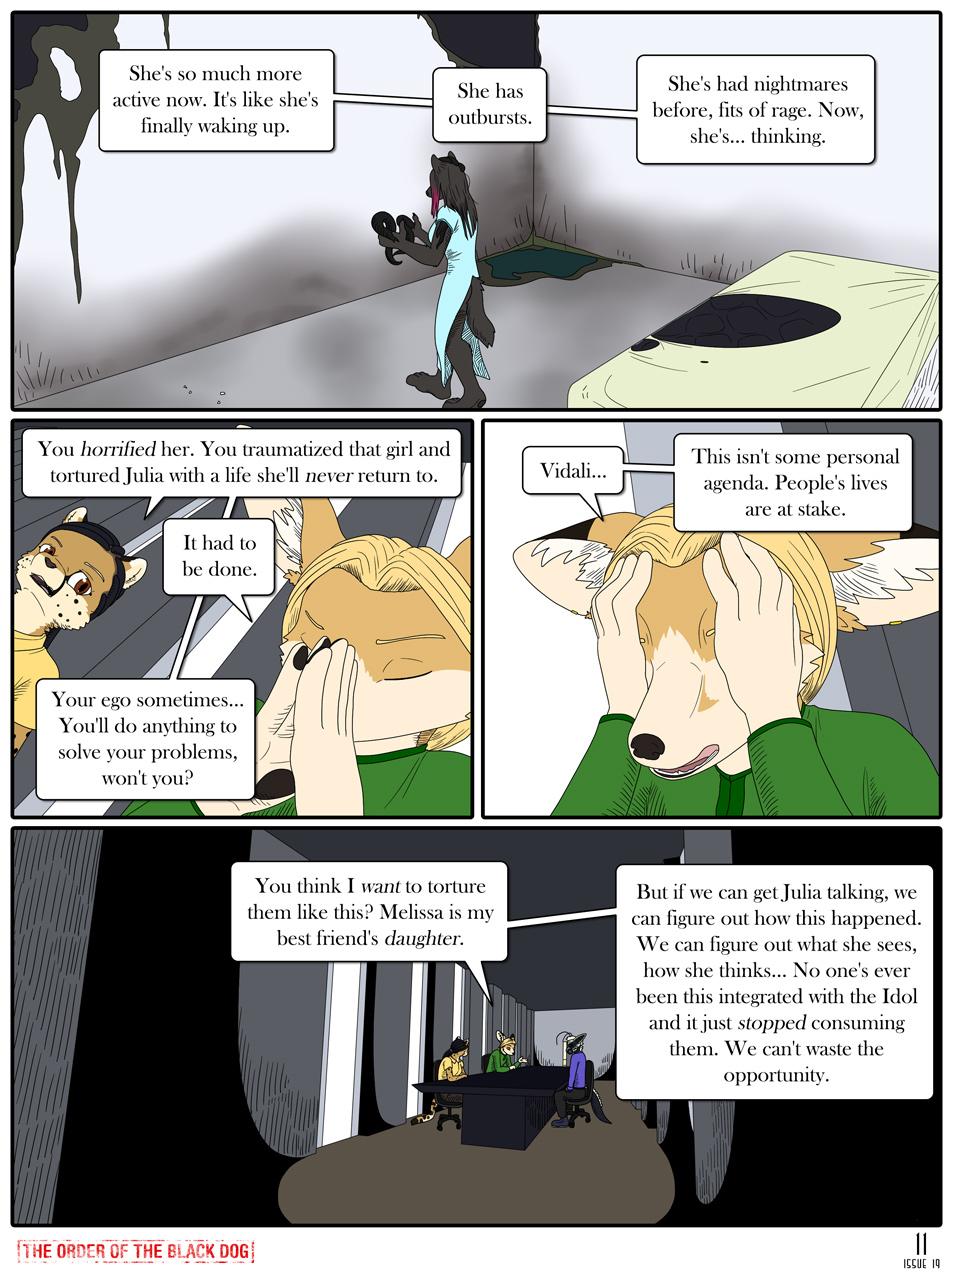 Issue 19, Page 11